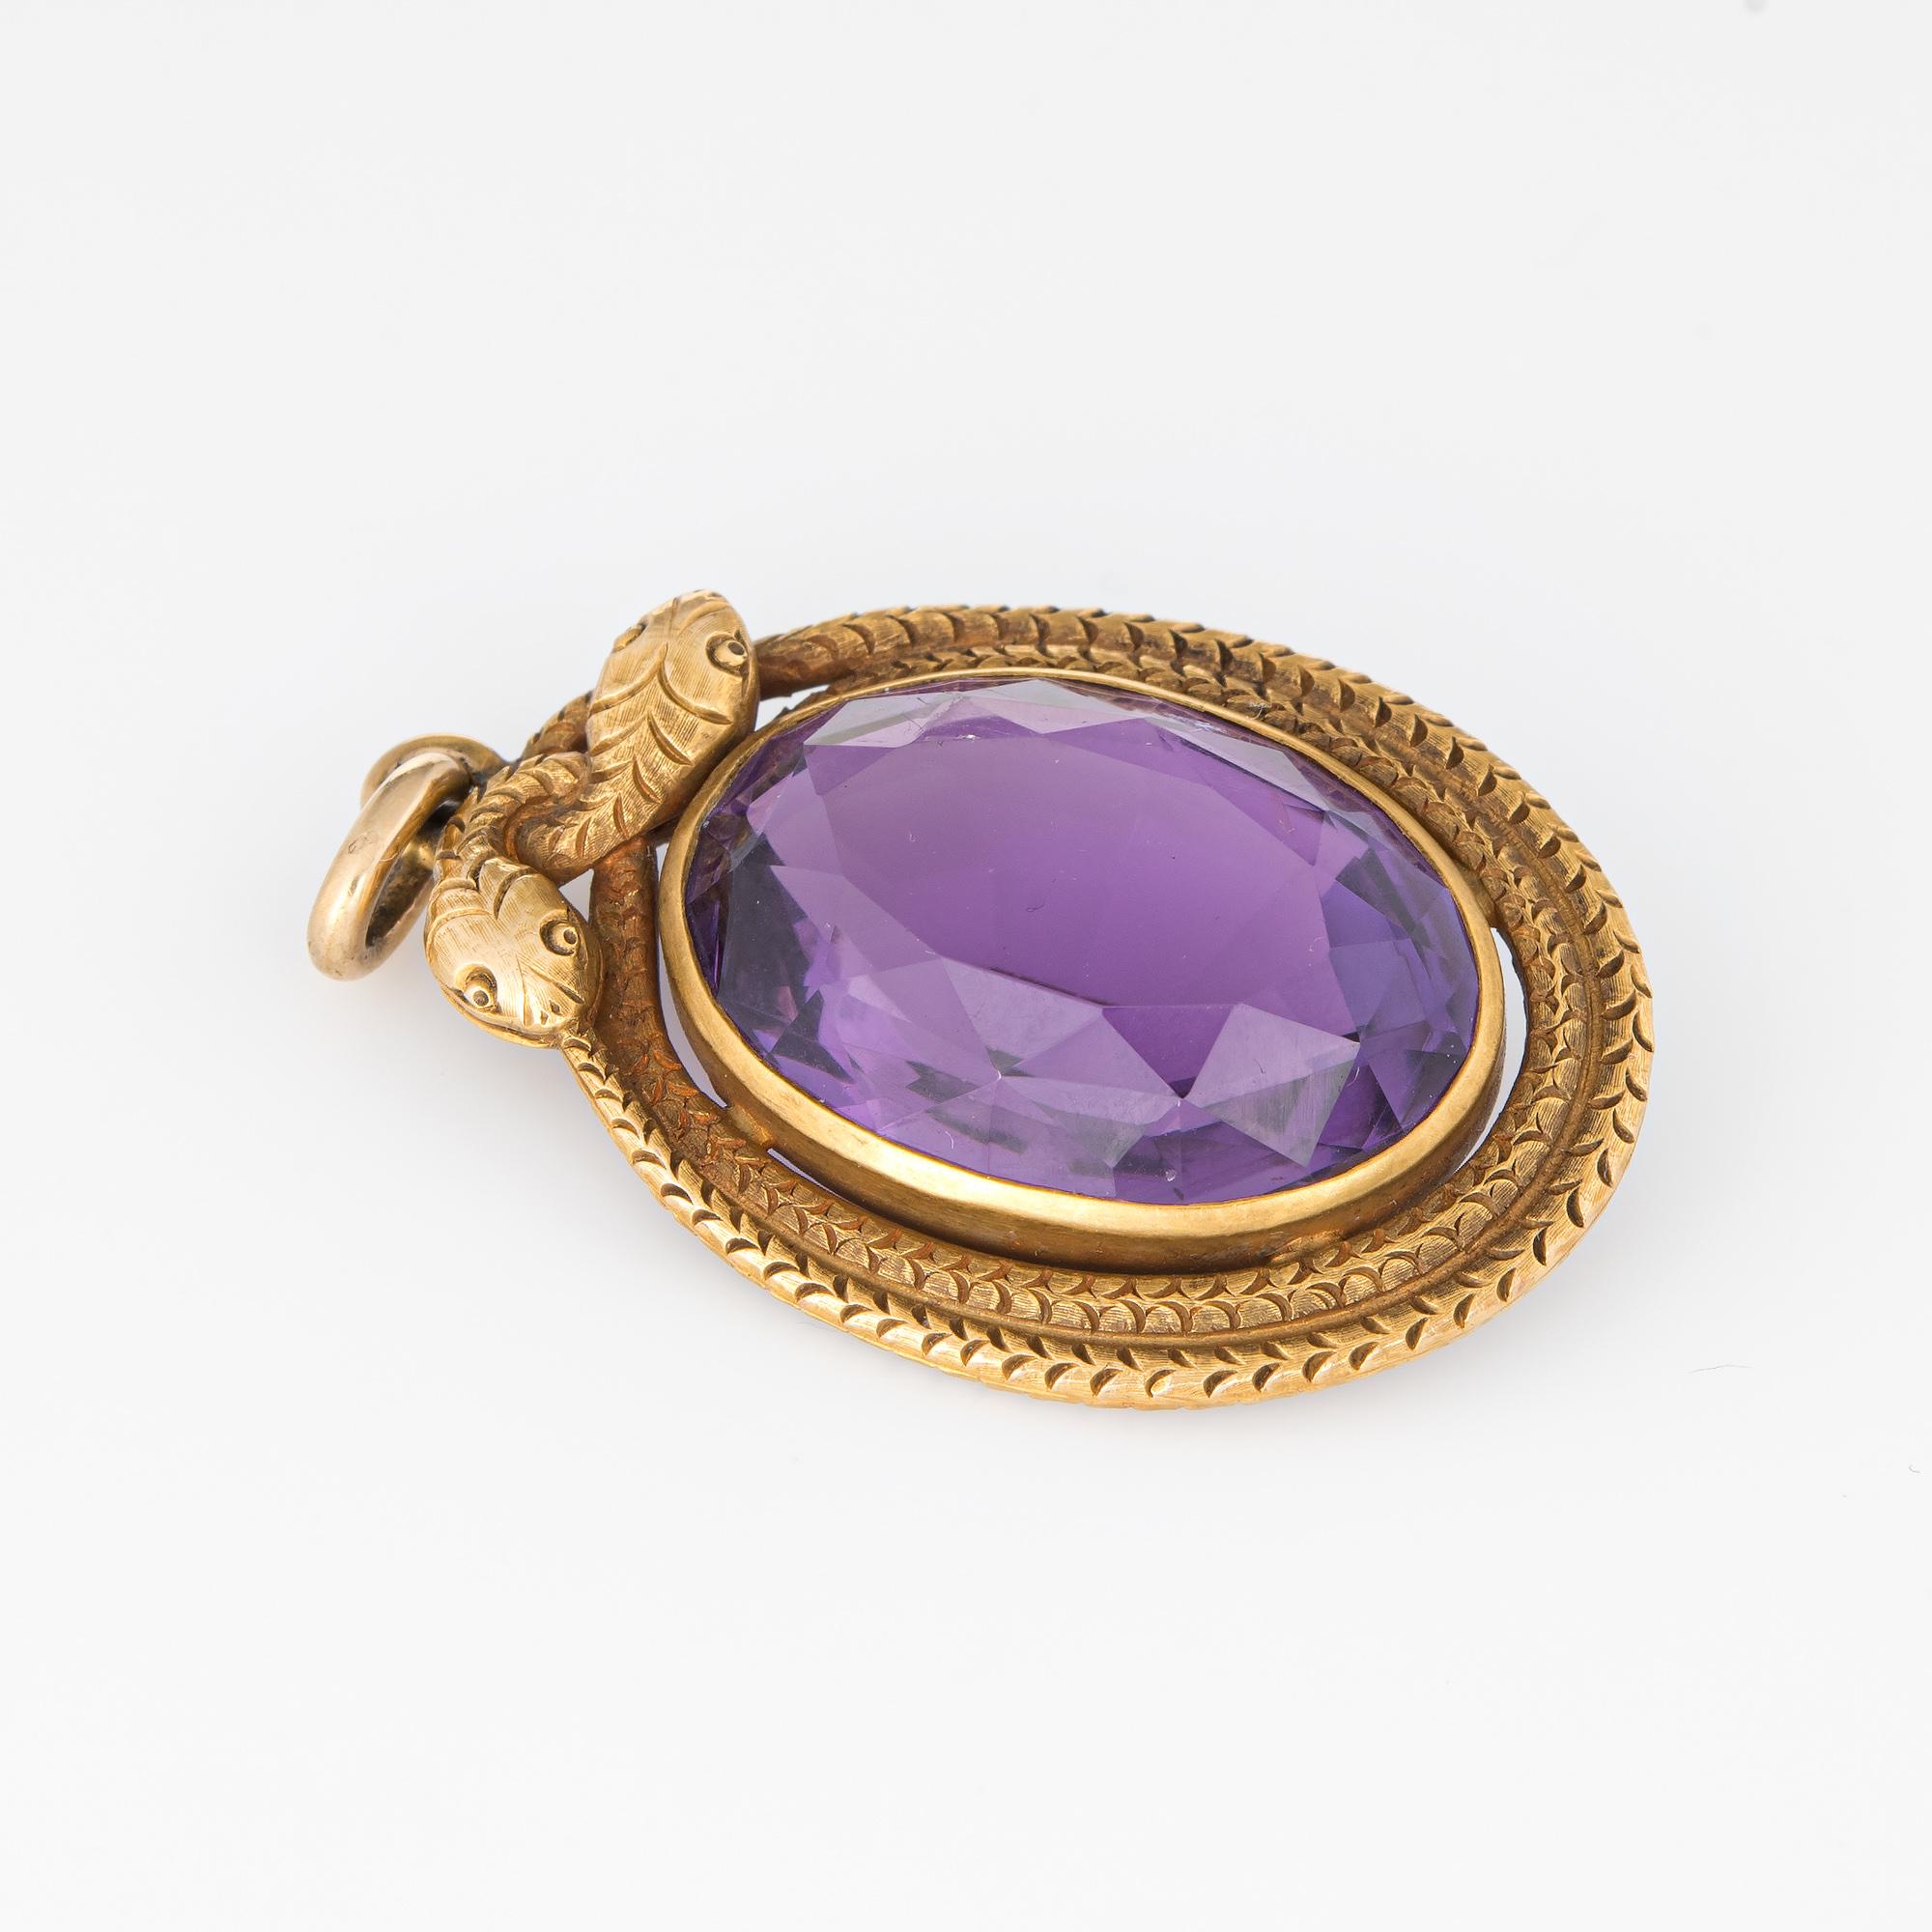 Finely detailed antique Victorian double snake pendant (circa 1880s to 1900s) crafted in 18k yellow gold. 

Oval faceted amethyst measures 23mm x 16mm (estimated at 25 carats). The amethyst is in excellent condition and free of cracks or chips.